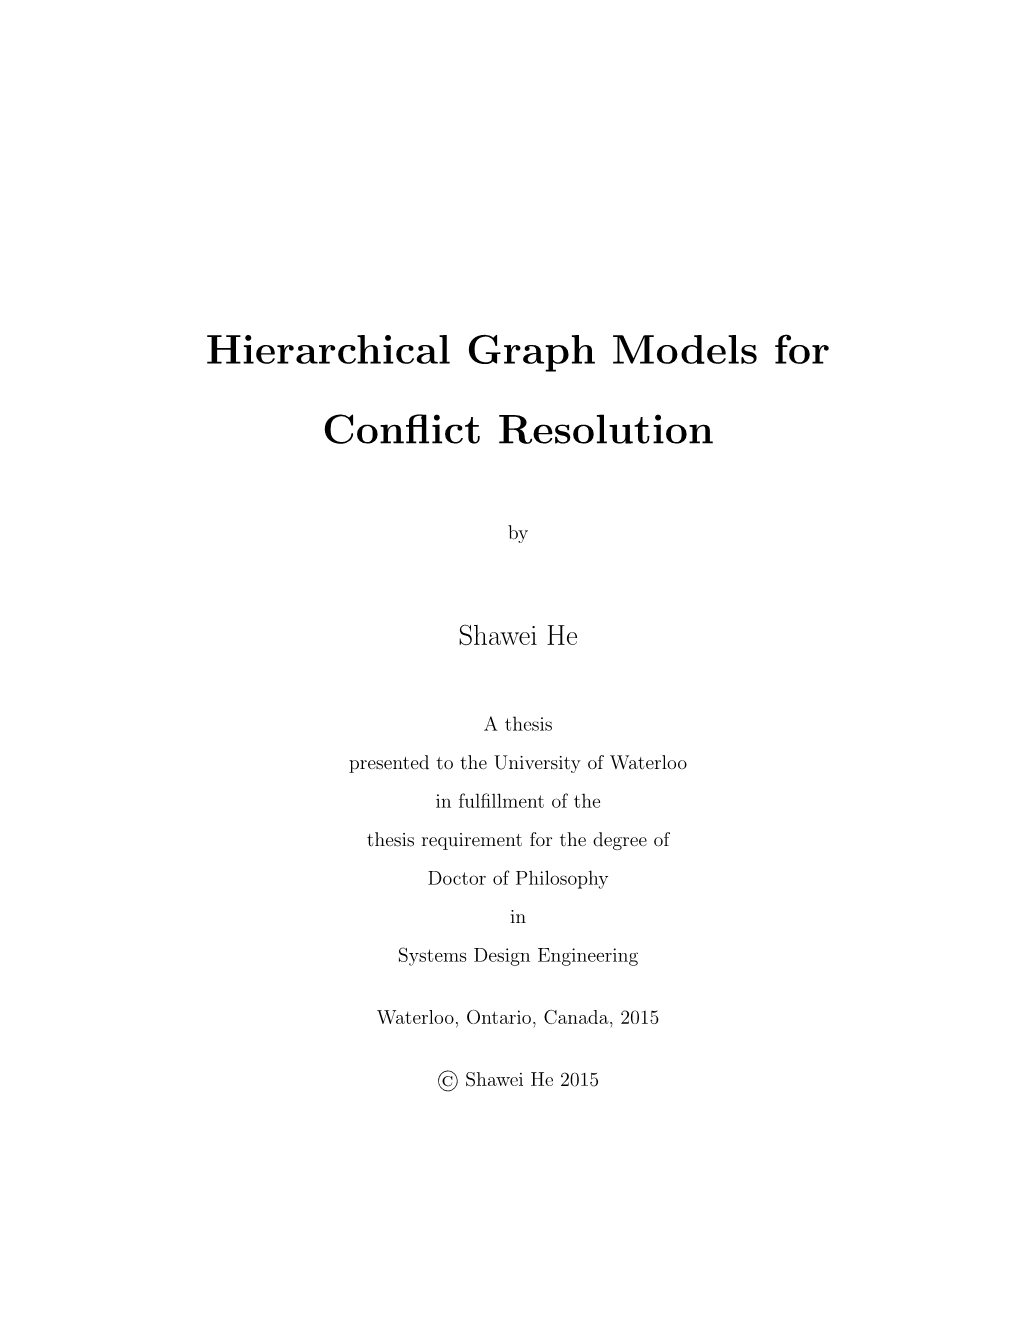 Hierarchical Graph Models for Conflict Resolution